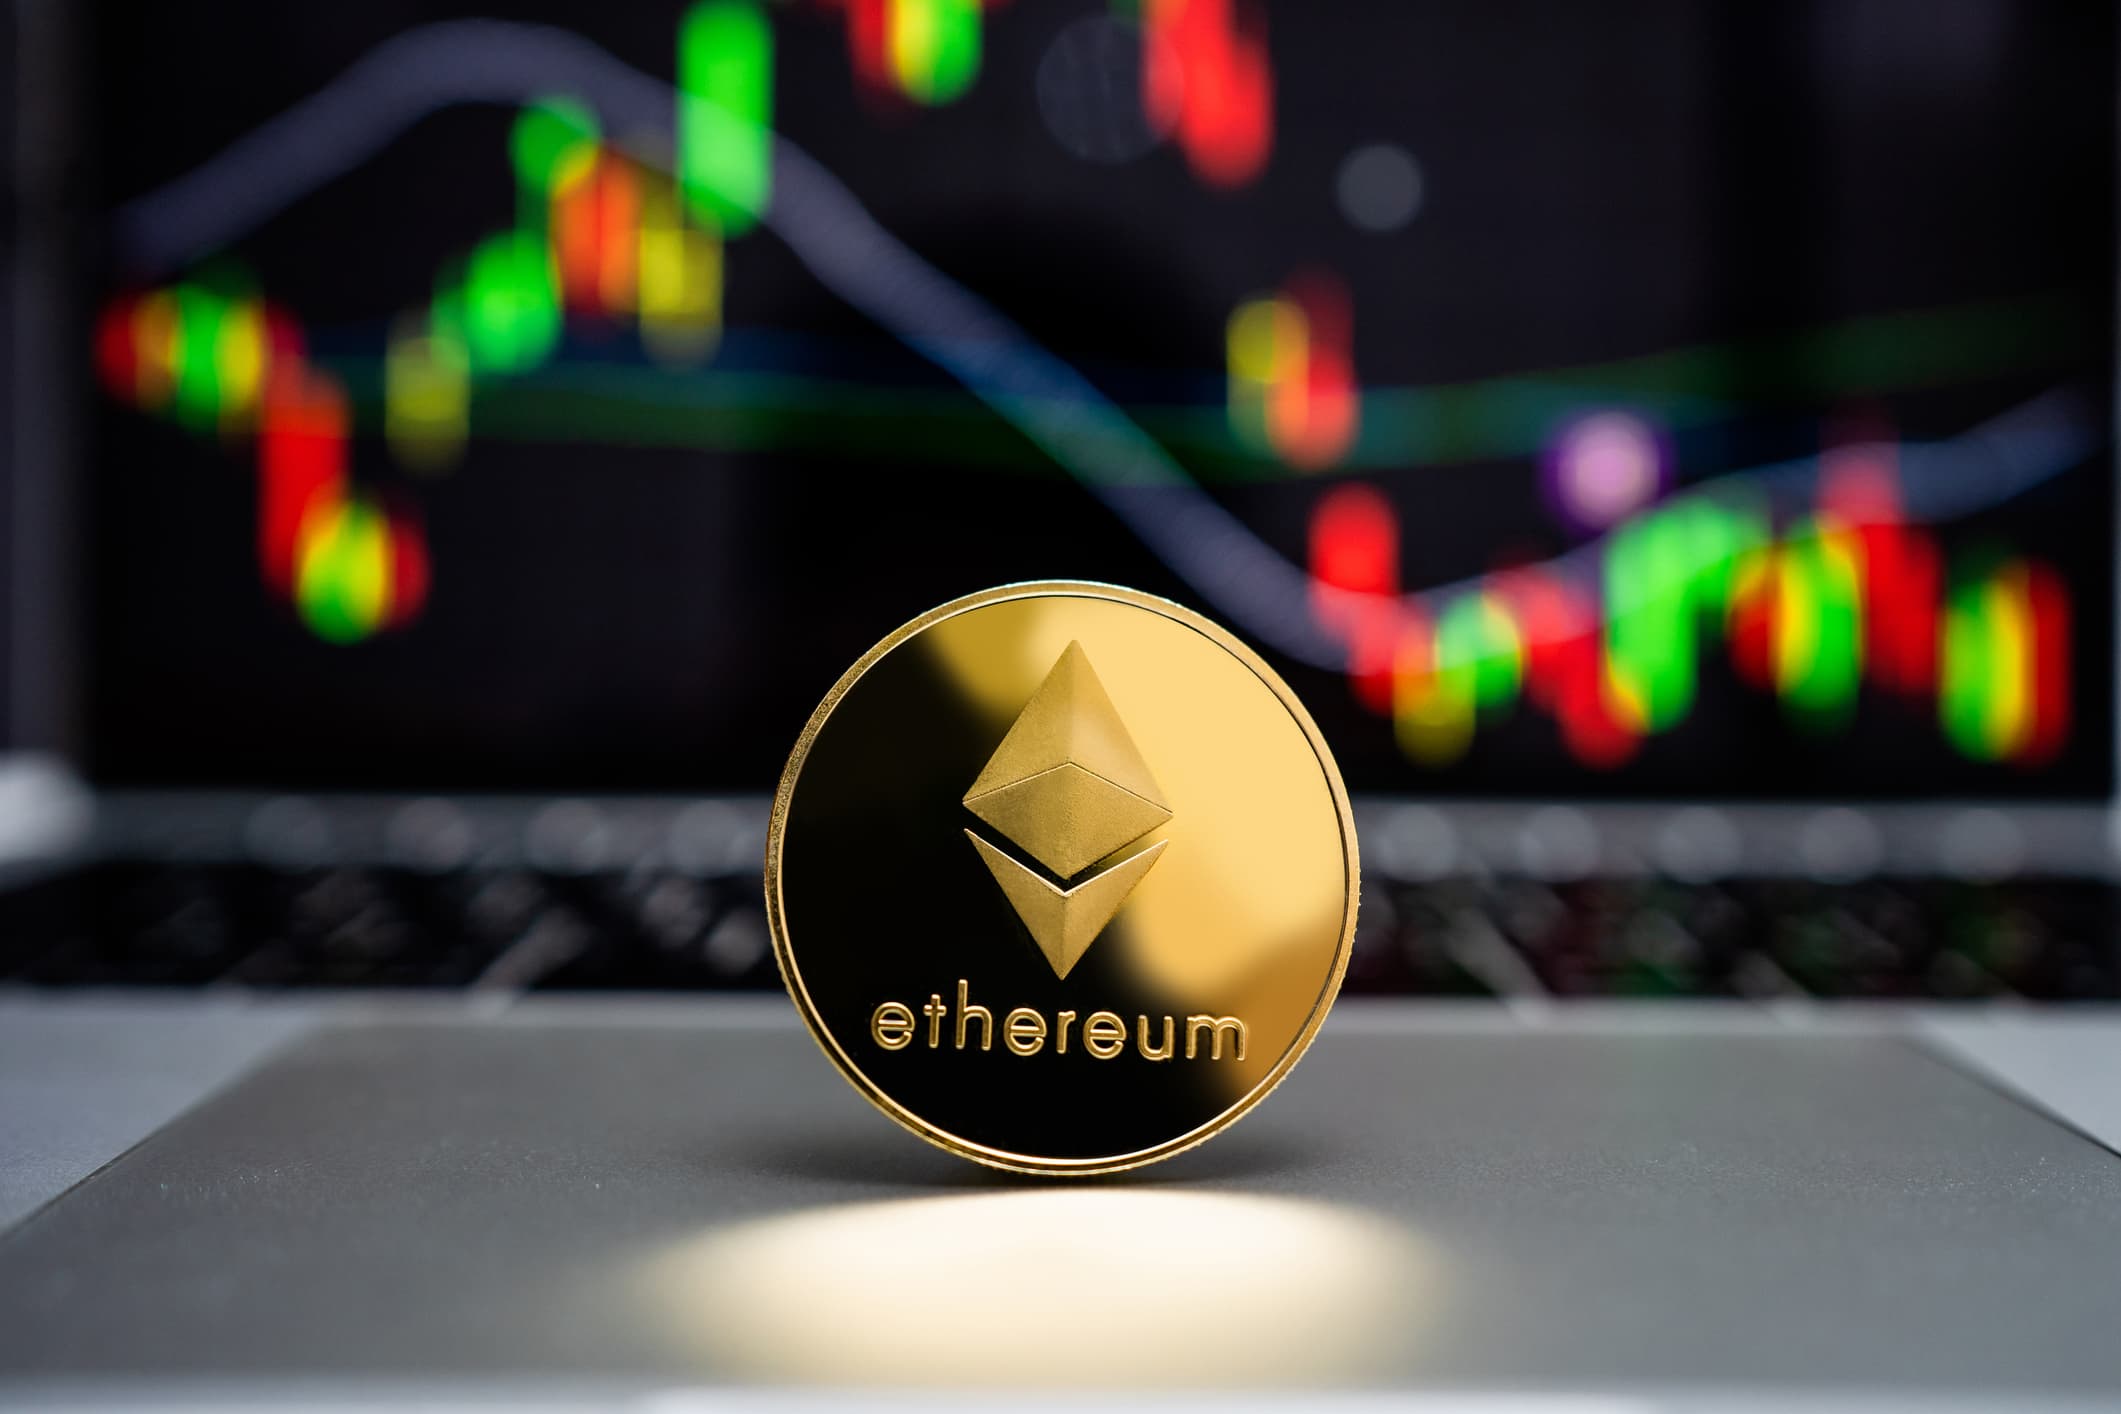 Here’s Why Ethereum’s Price Crashed So Low Since Merge: Details